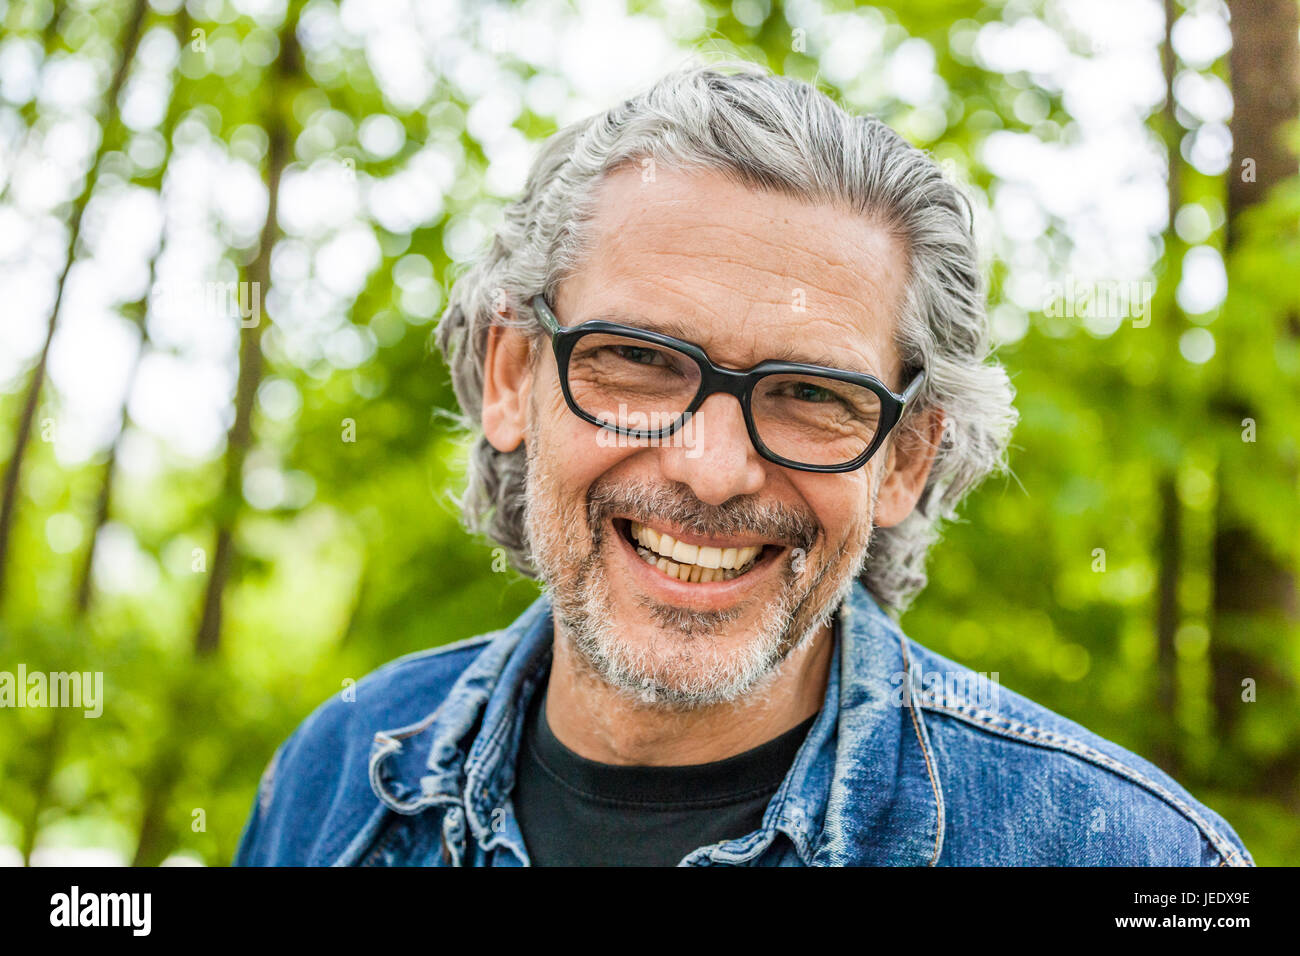 Portrait of laughing man with grey hair and beard wearing glasses Stock Photo